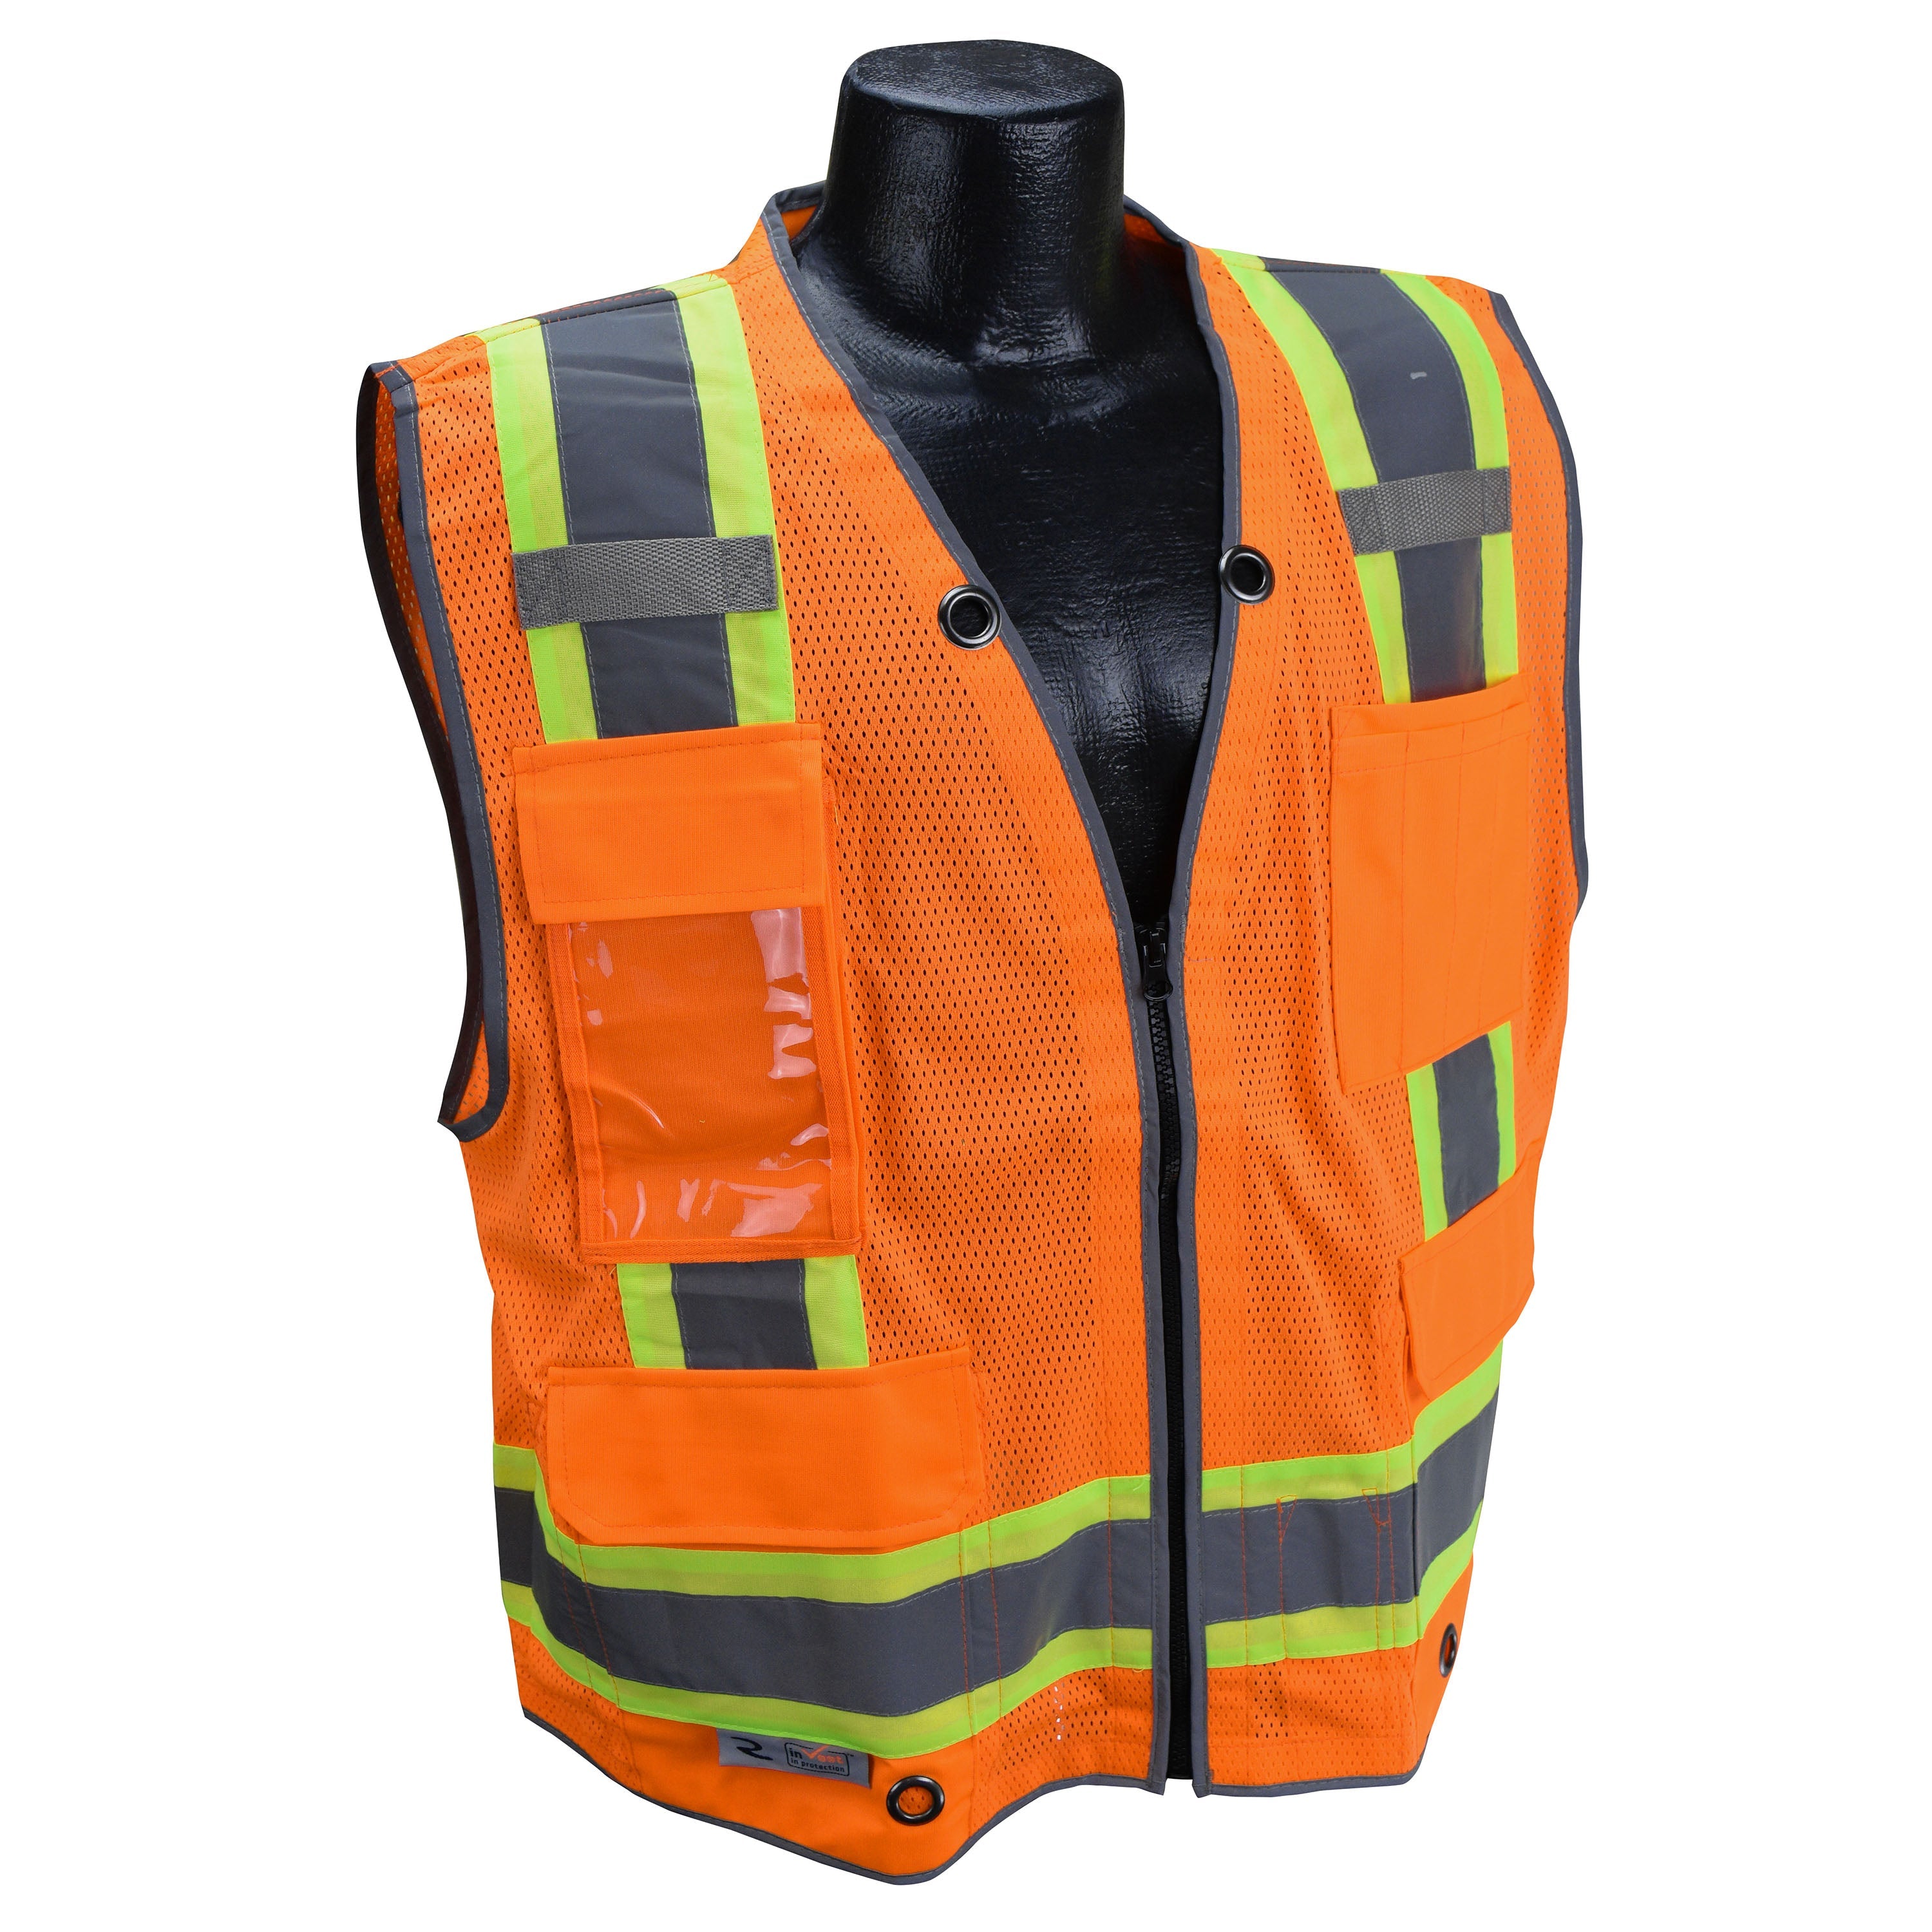 Radians SV6H Type R Class 2 Heavy Duty Two Tone Mesh Surveyor Vest with Solid Pockets